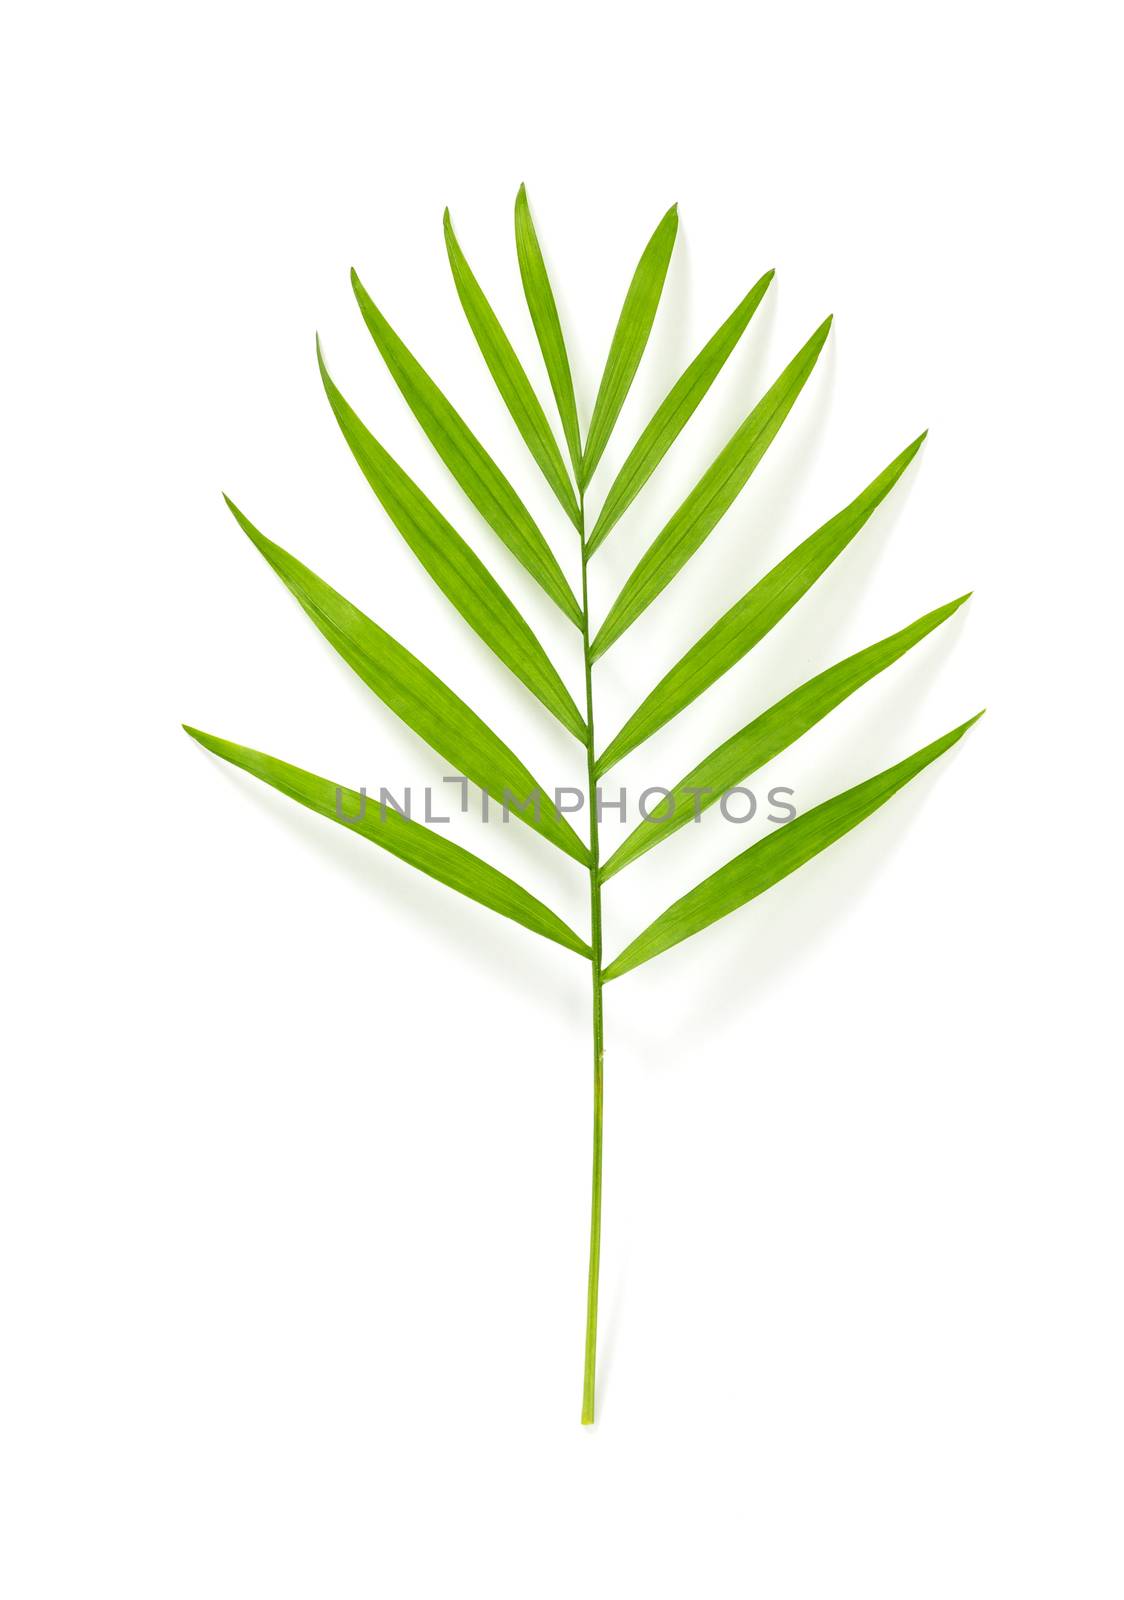 Parlor palm leaf isolated on white background by anikasalsera